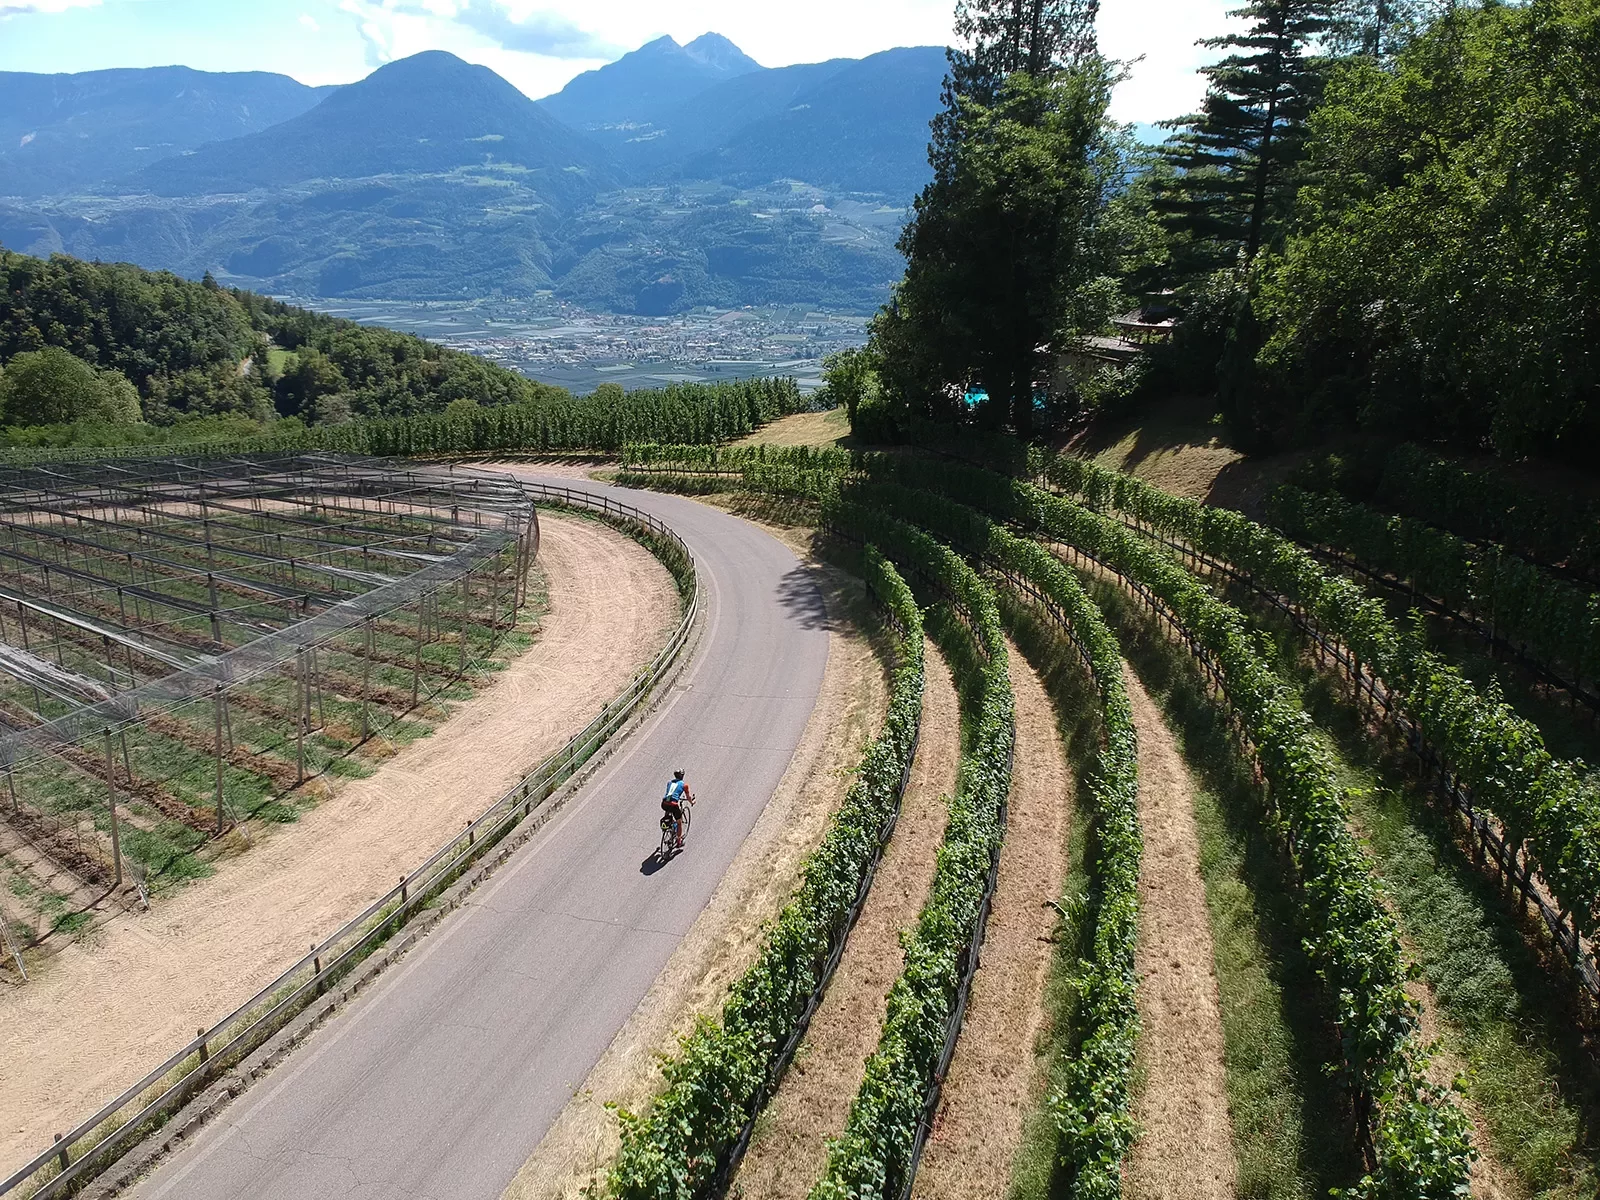 Guest cycling past rows of grape vines.